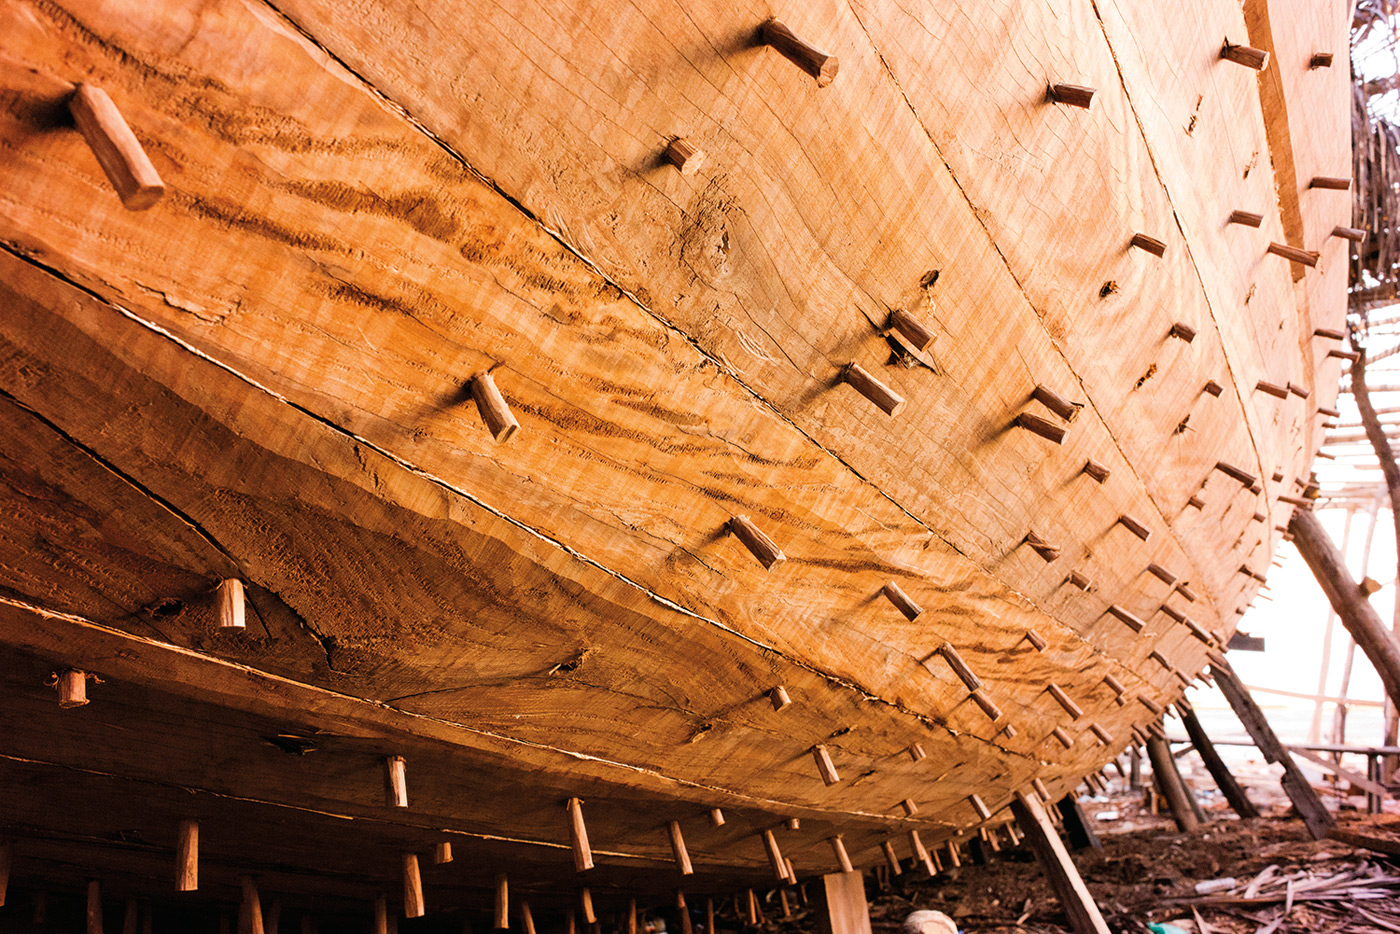 Timber dowels hold inner ribs to hull planks during construction.